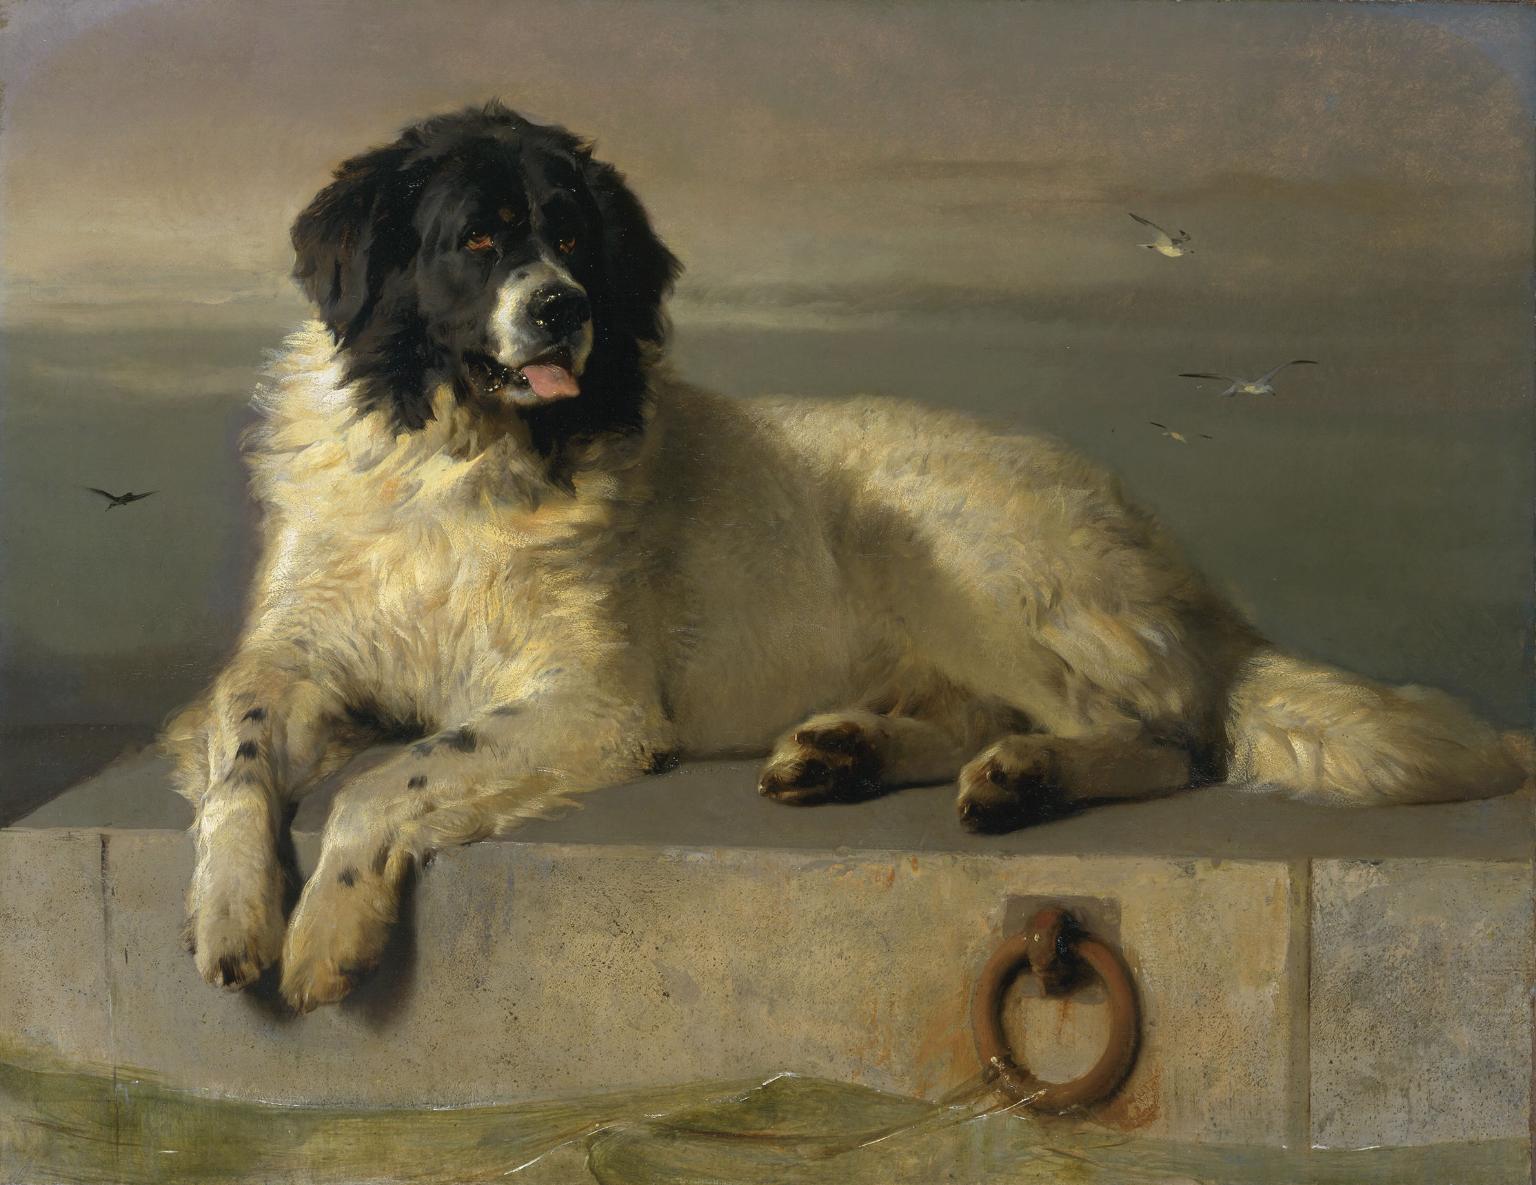 File:A Distinguished Member of the Humane Society by Sir Edwin Landseer.jpg